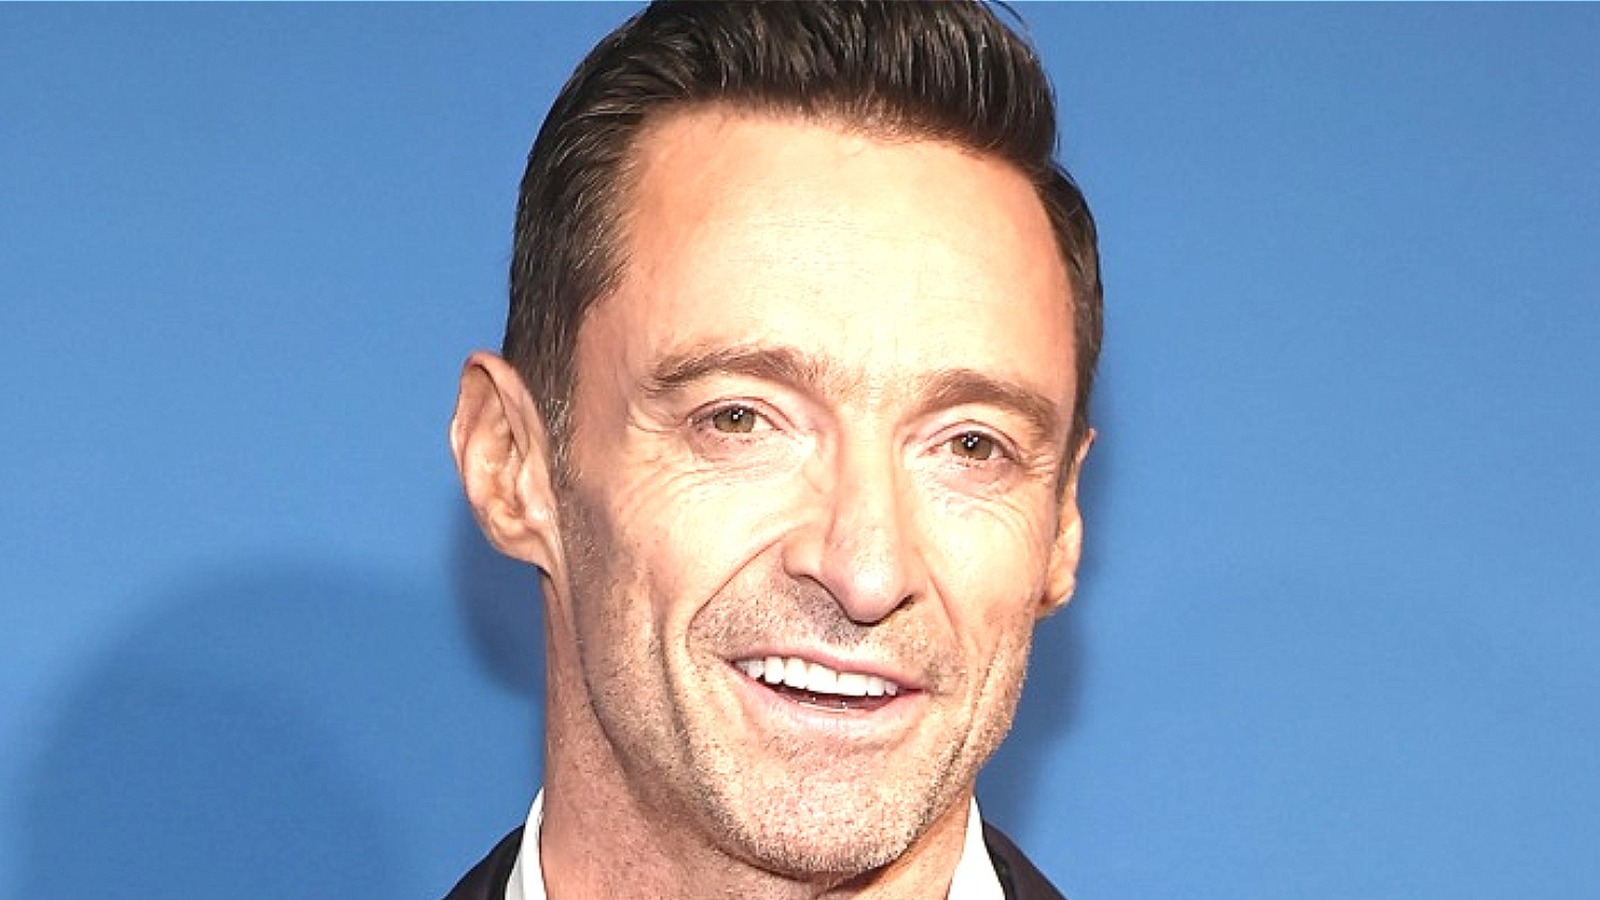 Hugh Jackman Confirms What We Suspected About His Feud With Ryan Reynolds